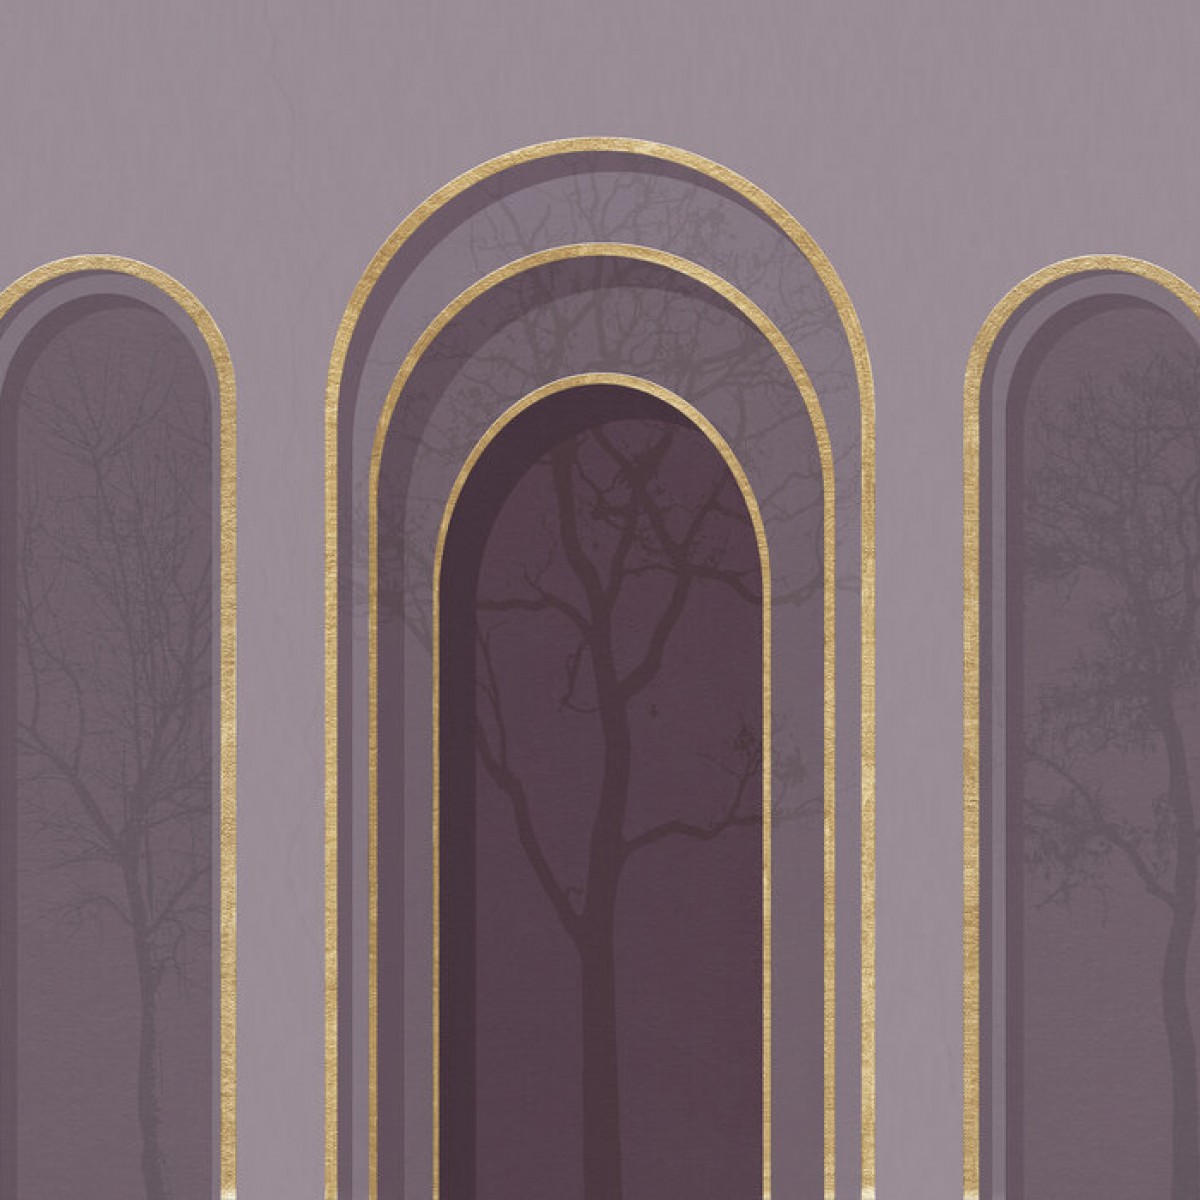 Fototapet Arch Adornment with Trees, Violet, Personalizat, Photowall, Fototapet living 